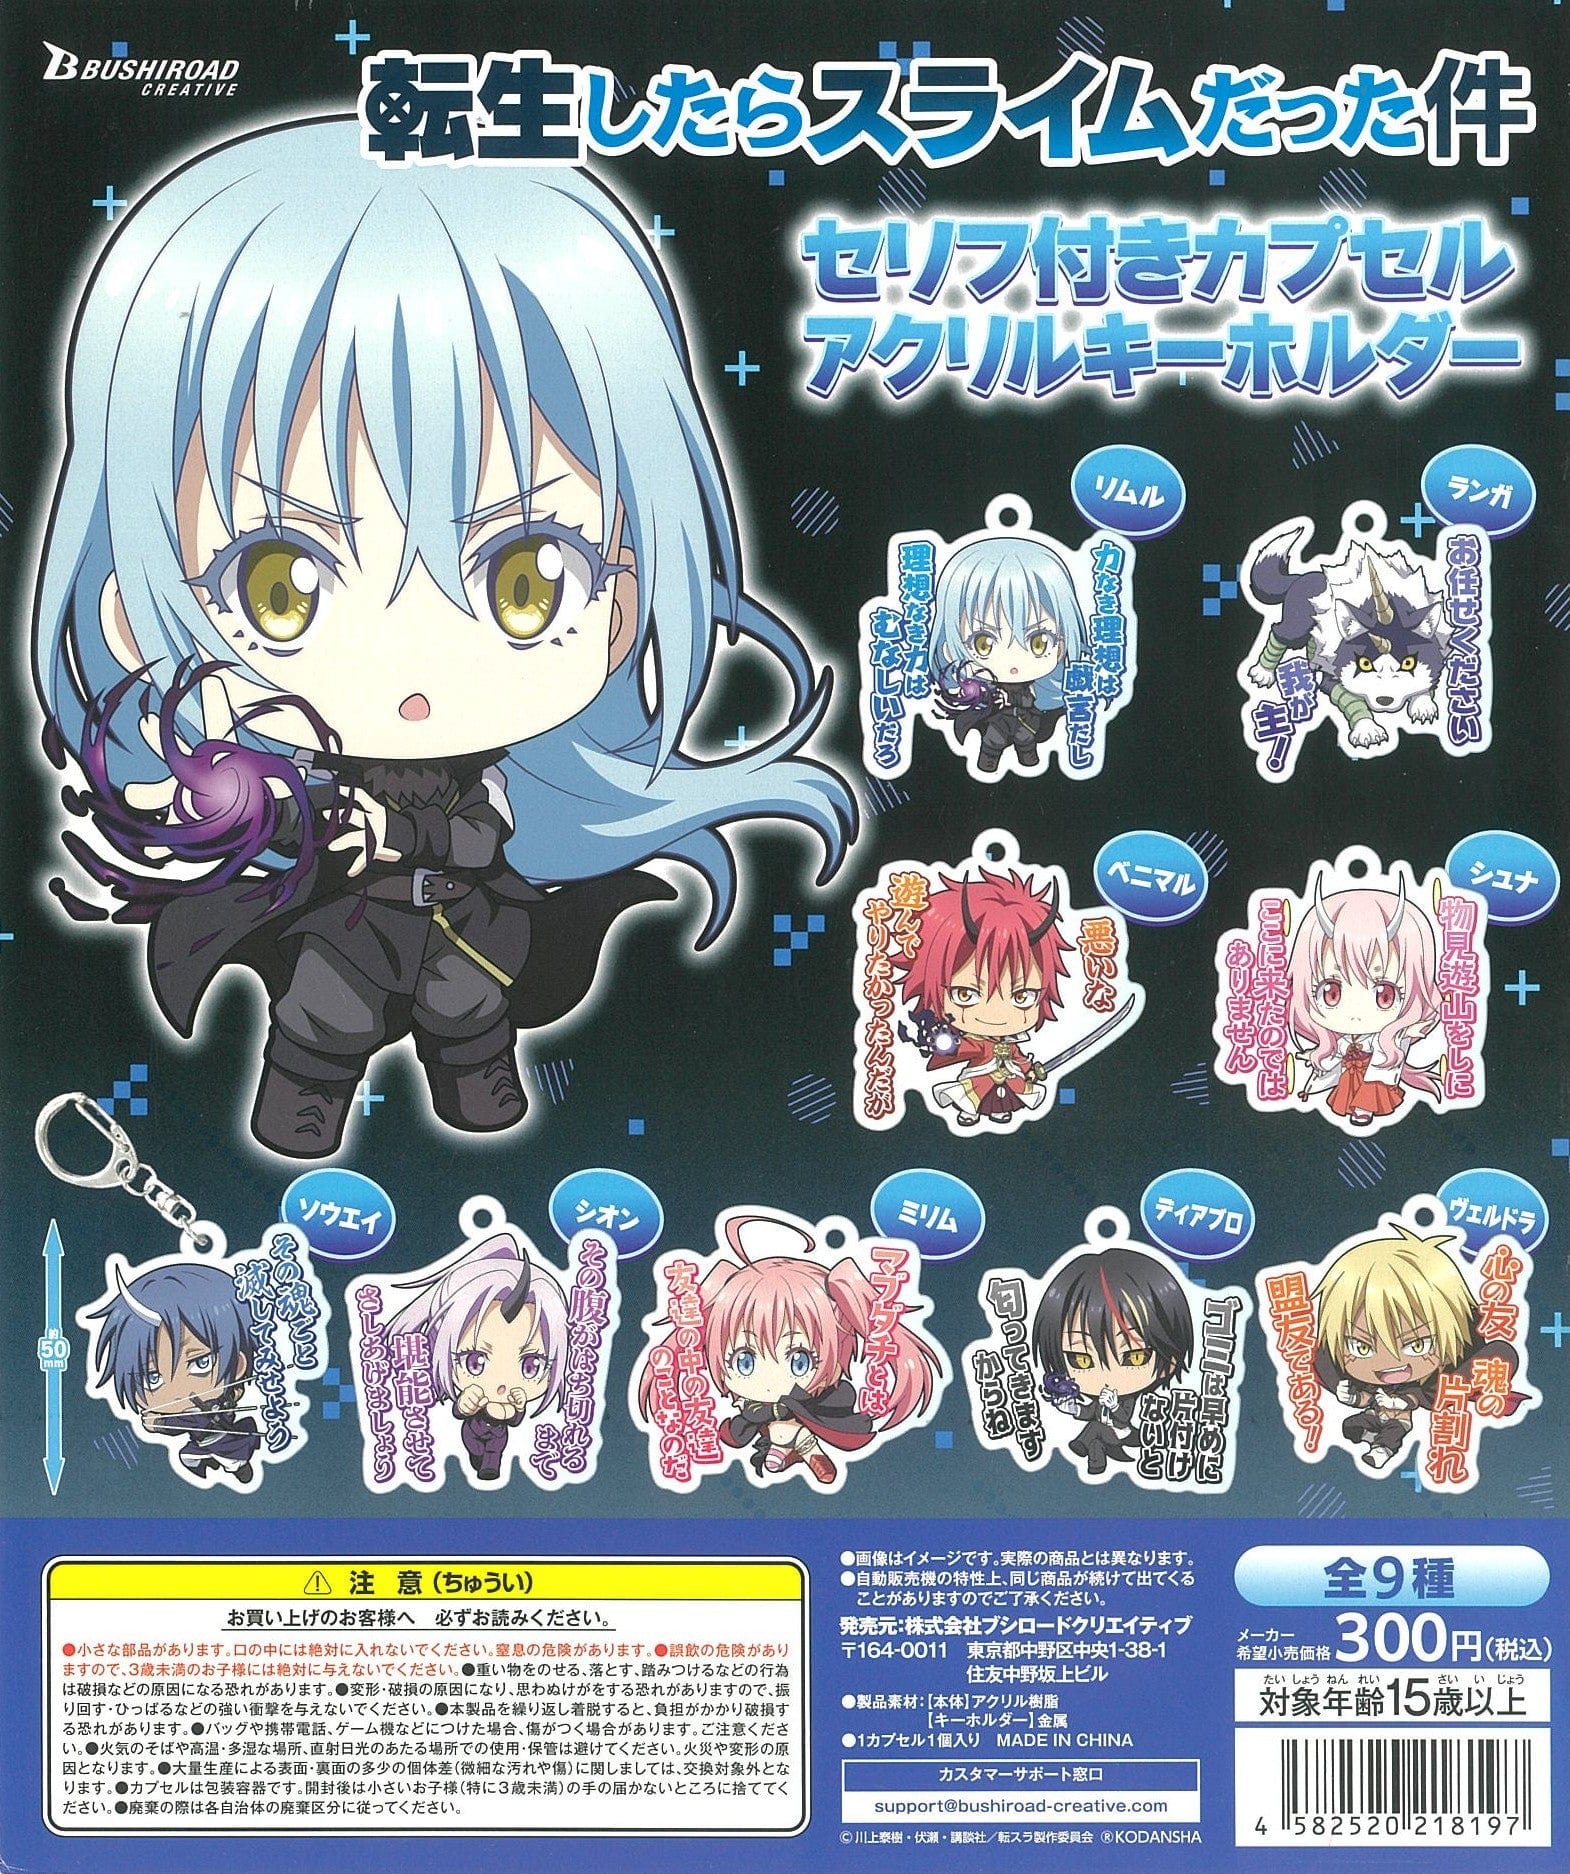 Bushiroad Creative CP1586 That Time I Got Reincarnated as a Slime Capsule Acrylic Key Chain with Words